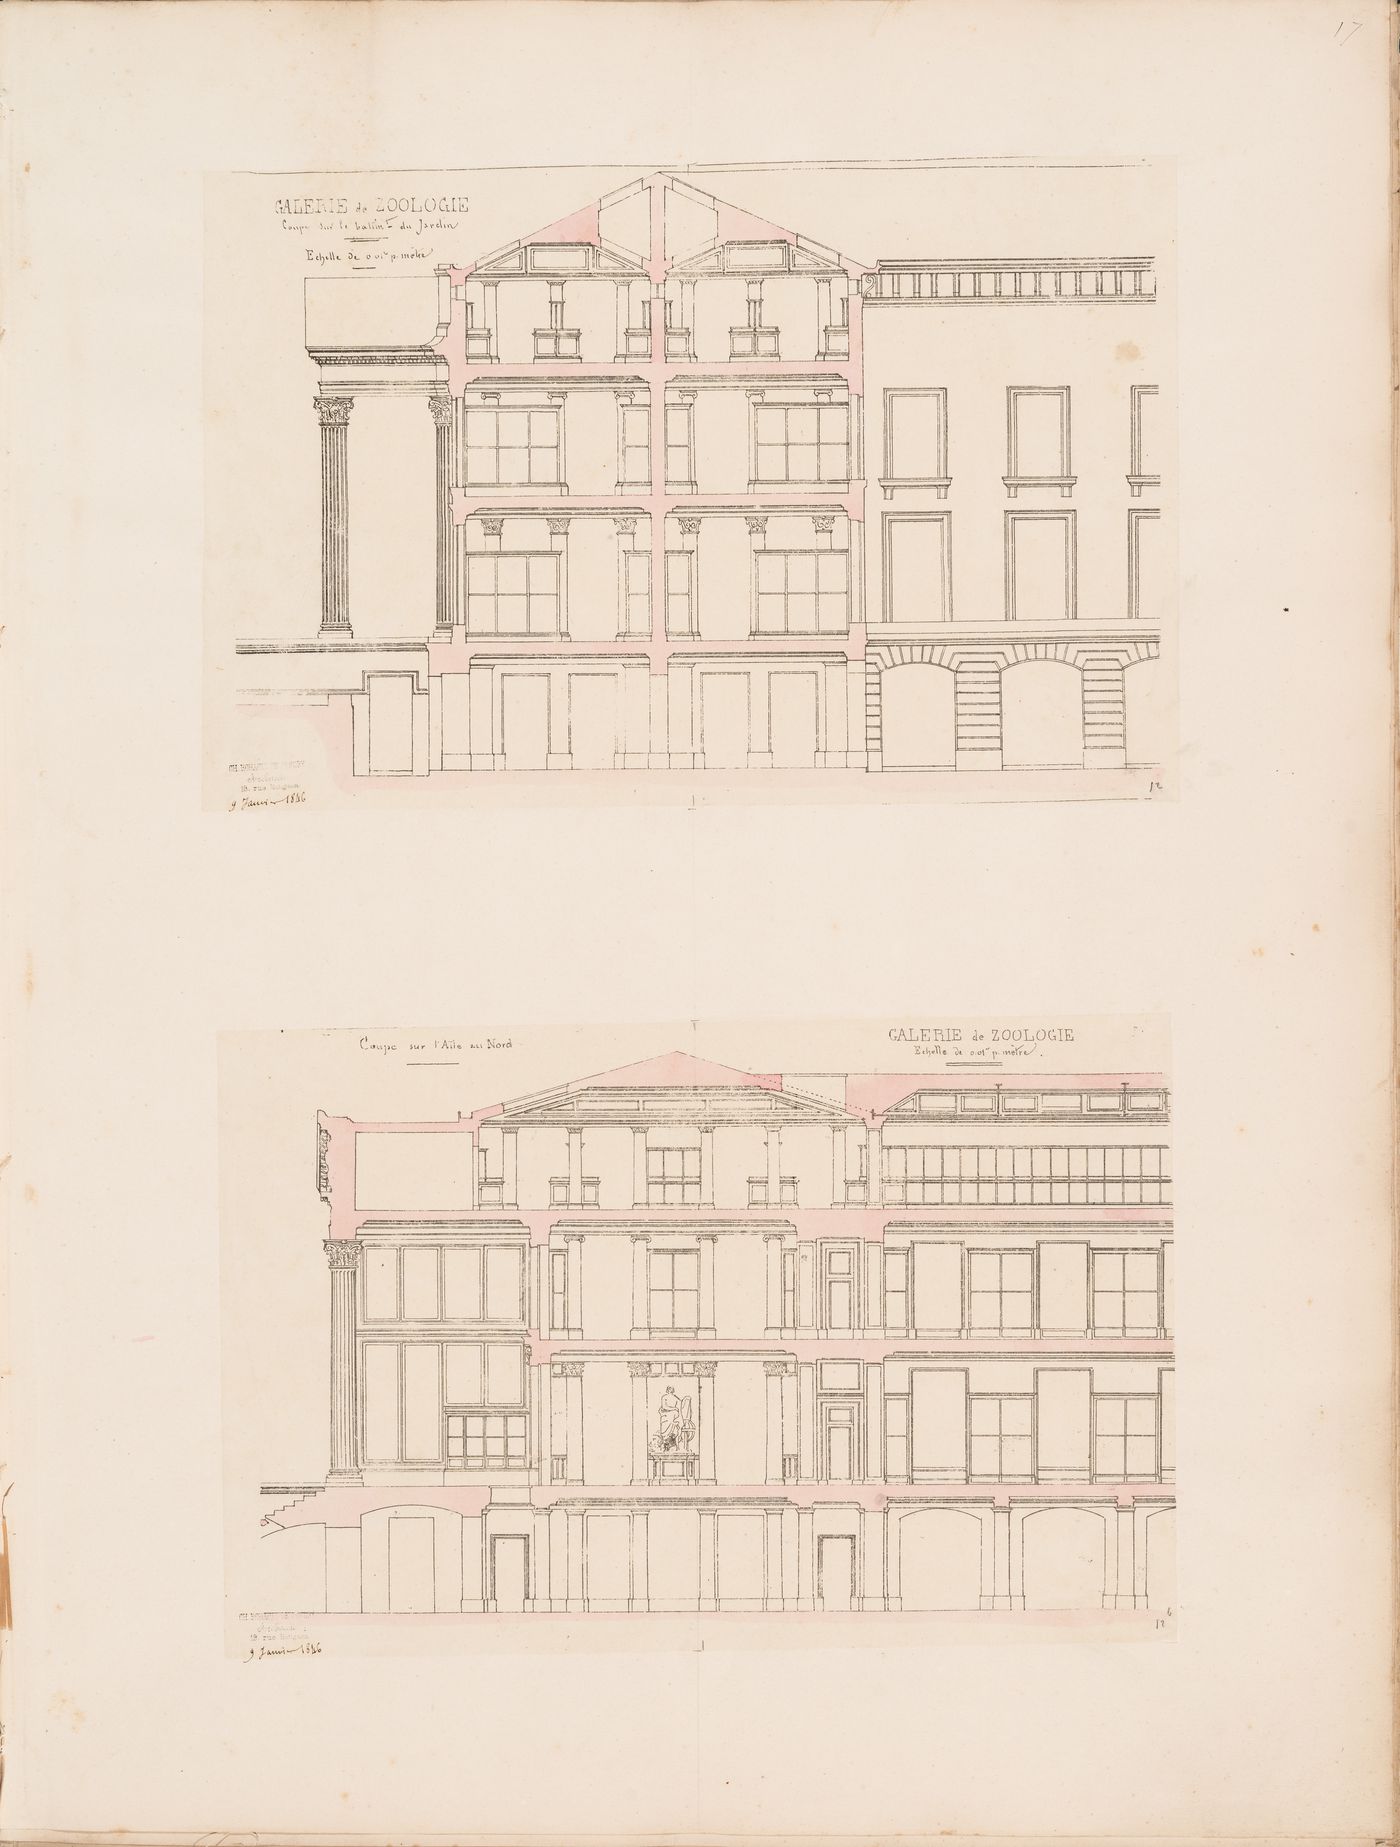 Project for a Galerie de zoologie, 1846: Section through the main wing and courtyard and a section through the north wing